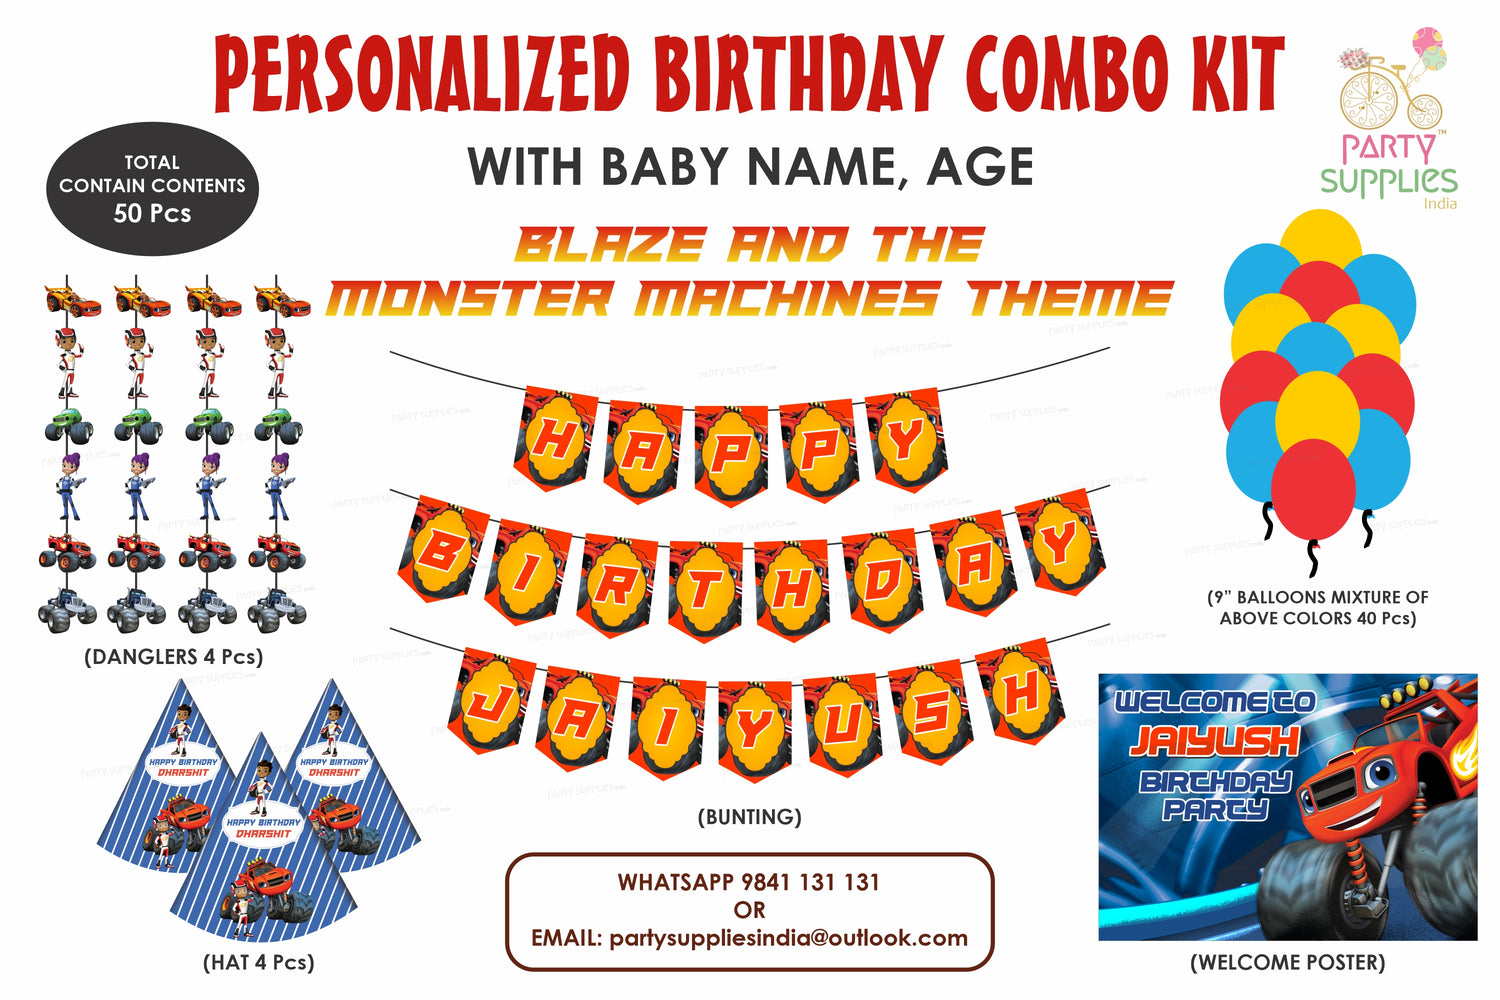 PSI Blaze and the Monster Machines Theme Heritage Kit